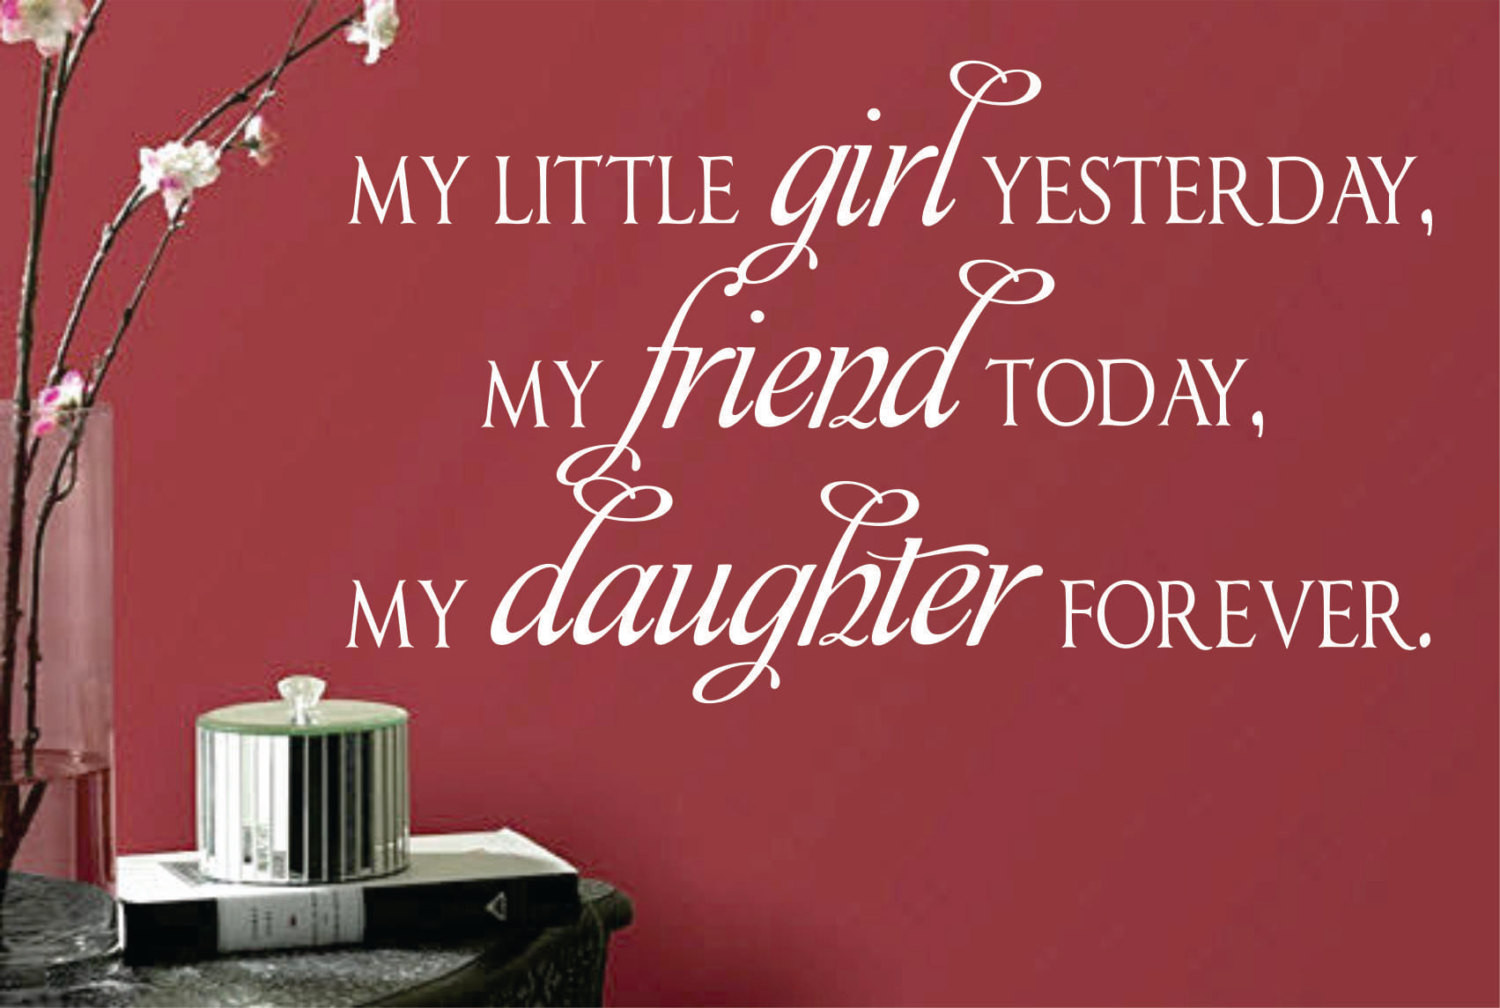 Quotes On Mother And Daughter
 Vinyl Wall Lettering Daughter Forever by WallsThatTalk on Etsy